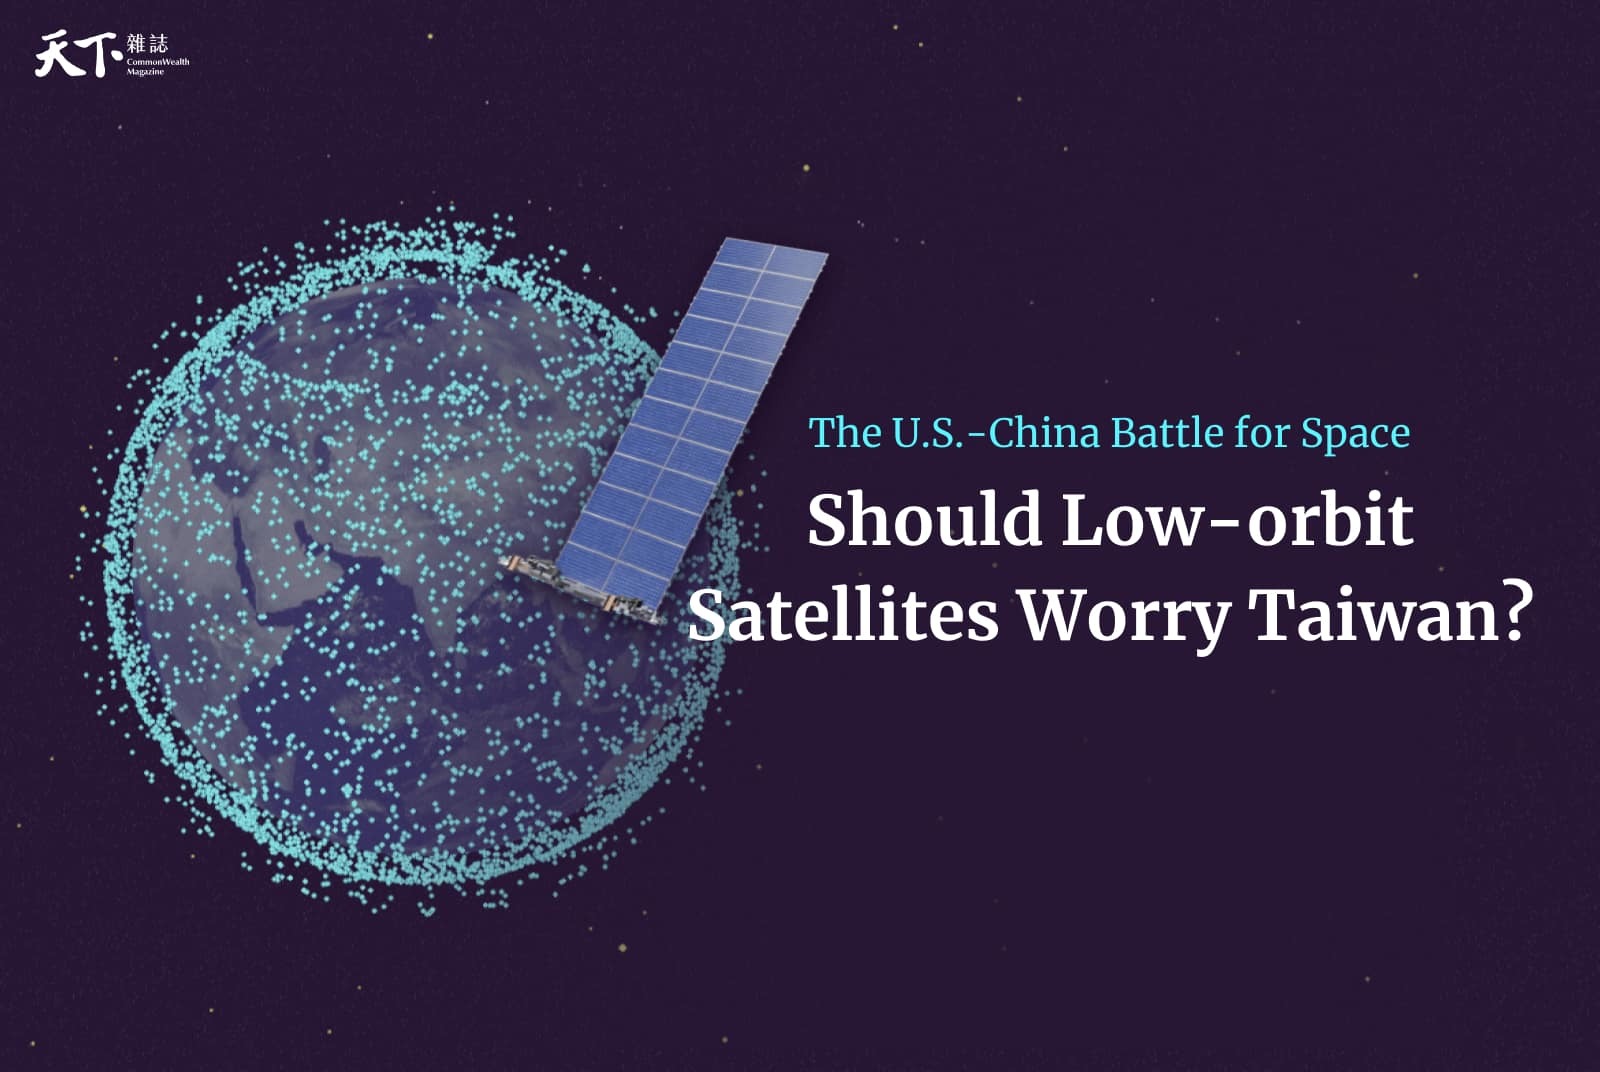 The U.S.-China Battle for Space: Should Low-orbit Satellites Worry Taiwan?